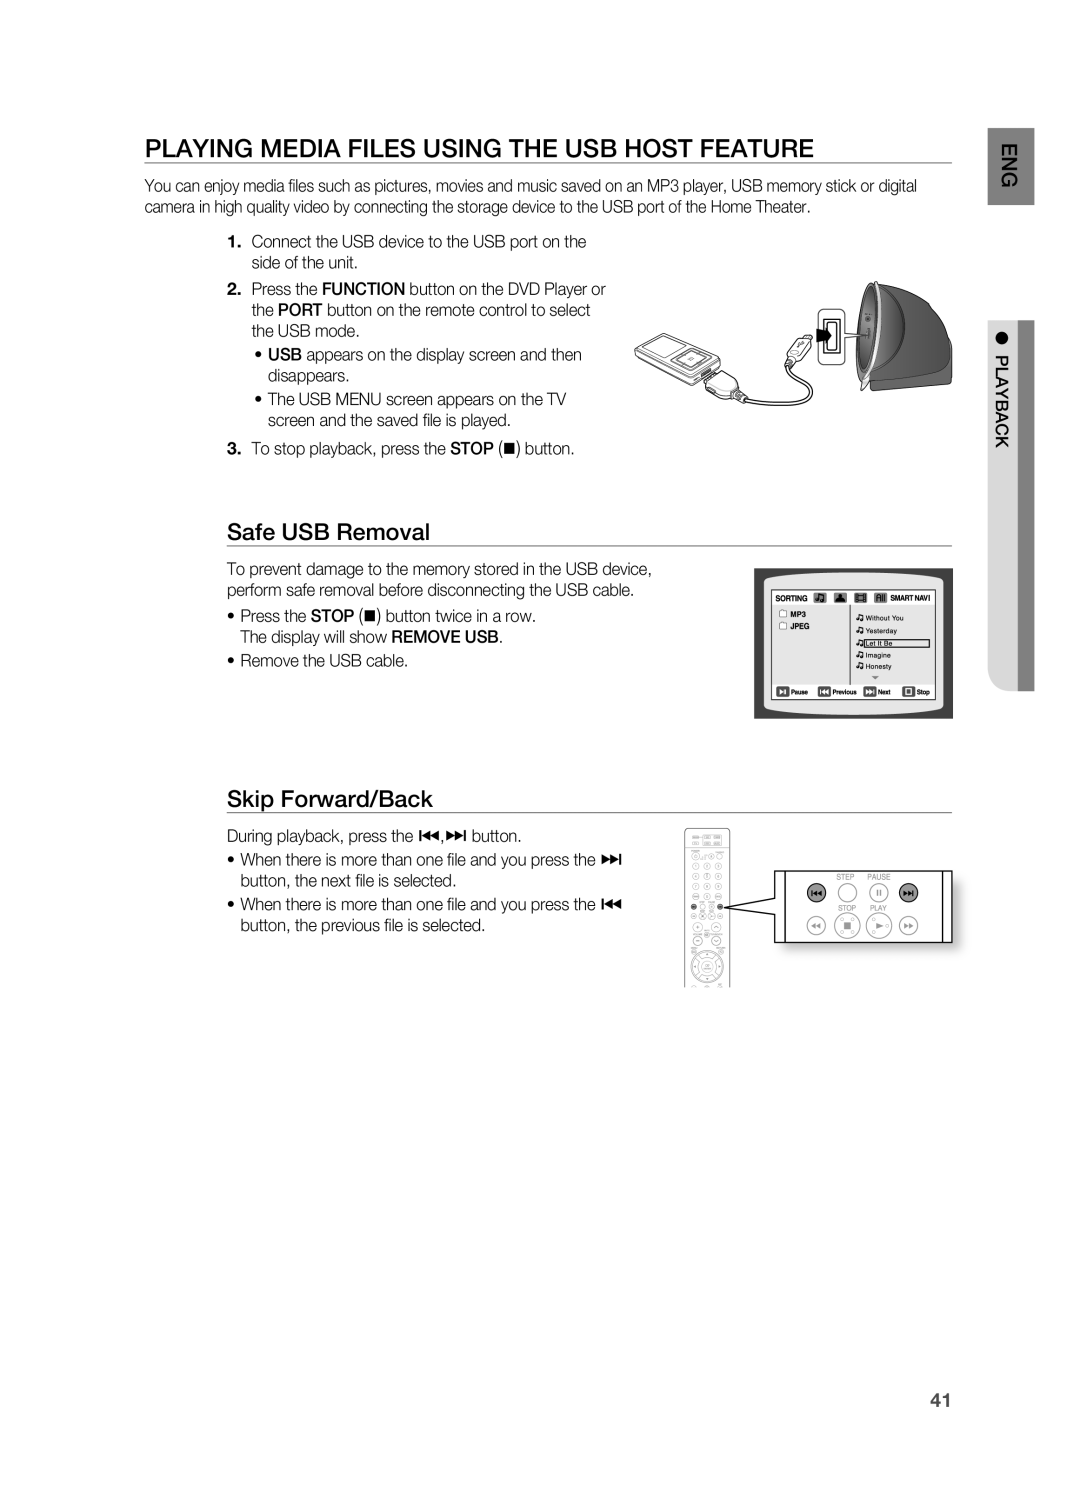 Sony HT-X810 user manual PlAYING MEDIA FIlES USING THE USB HOST FEATUrE, Safe USB removal, Skip Forward/Back 